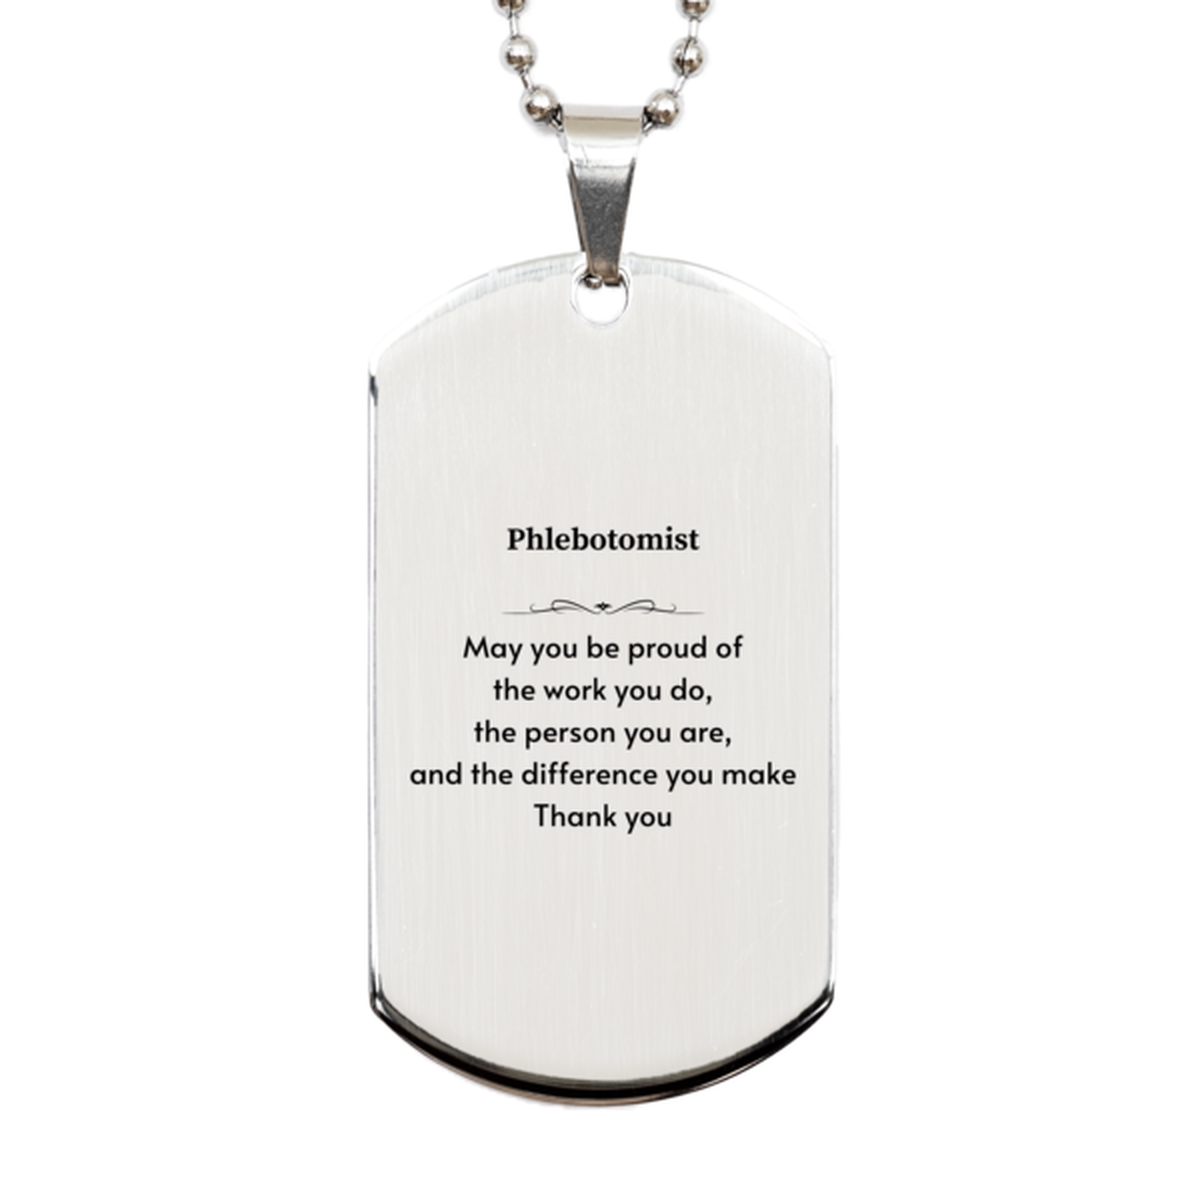 Heartwarming Silver Dog Tag Retirement Coworkers Gifts for Phlebotomist, Phlebotomist May You be proud of the work you do, the person you are Gifts for Boss Men Women Friends